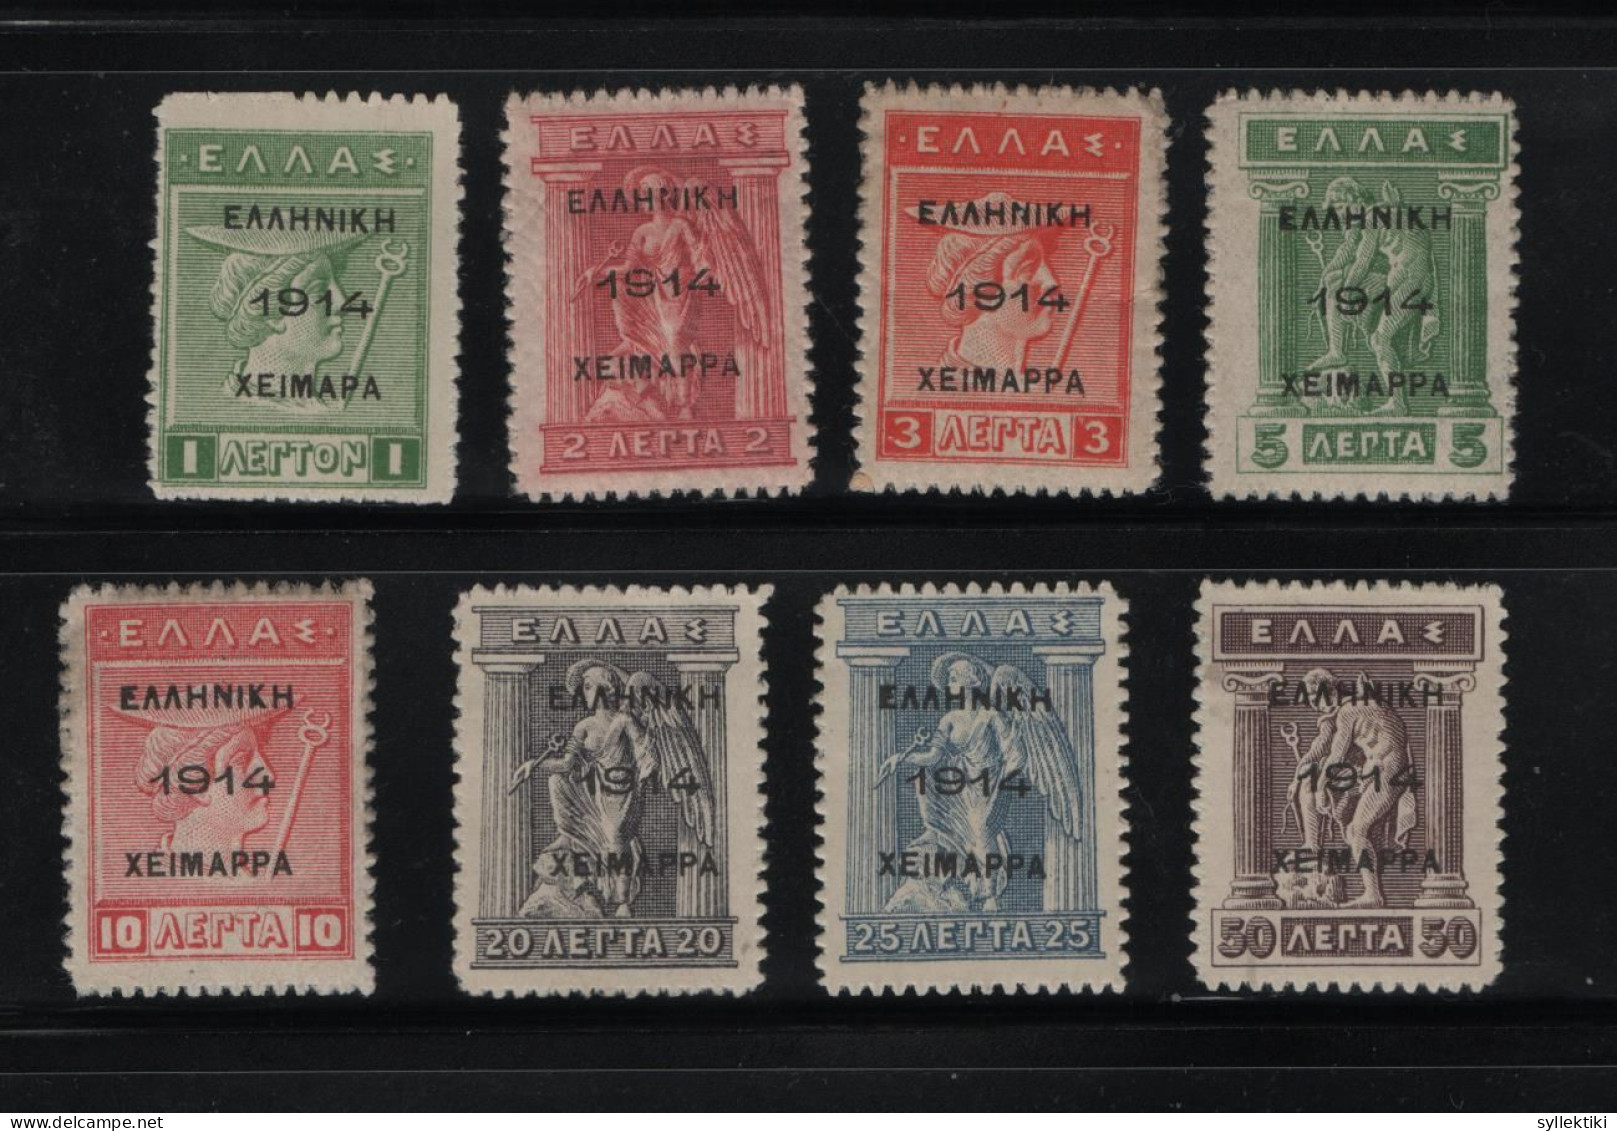 GREECE EPIRUS 1914 CHIMARRA ISSUE COMPLETE SET MH STAMPS    HELLAS No 68 - 75 AND VALUE EURO 1300.00 - North Epirus